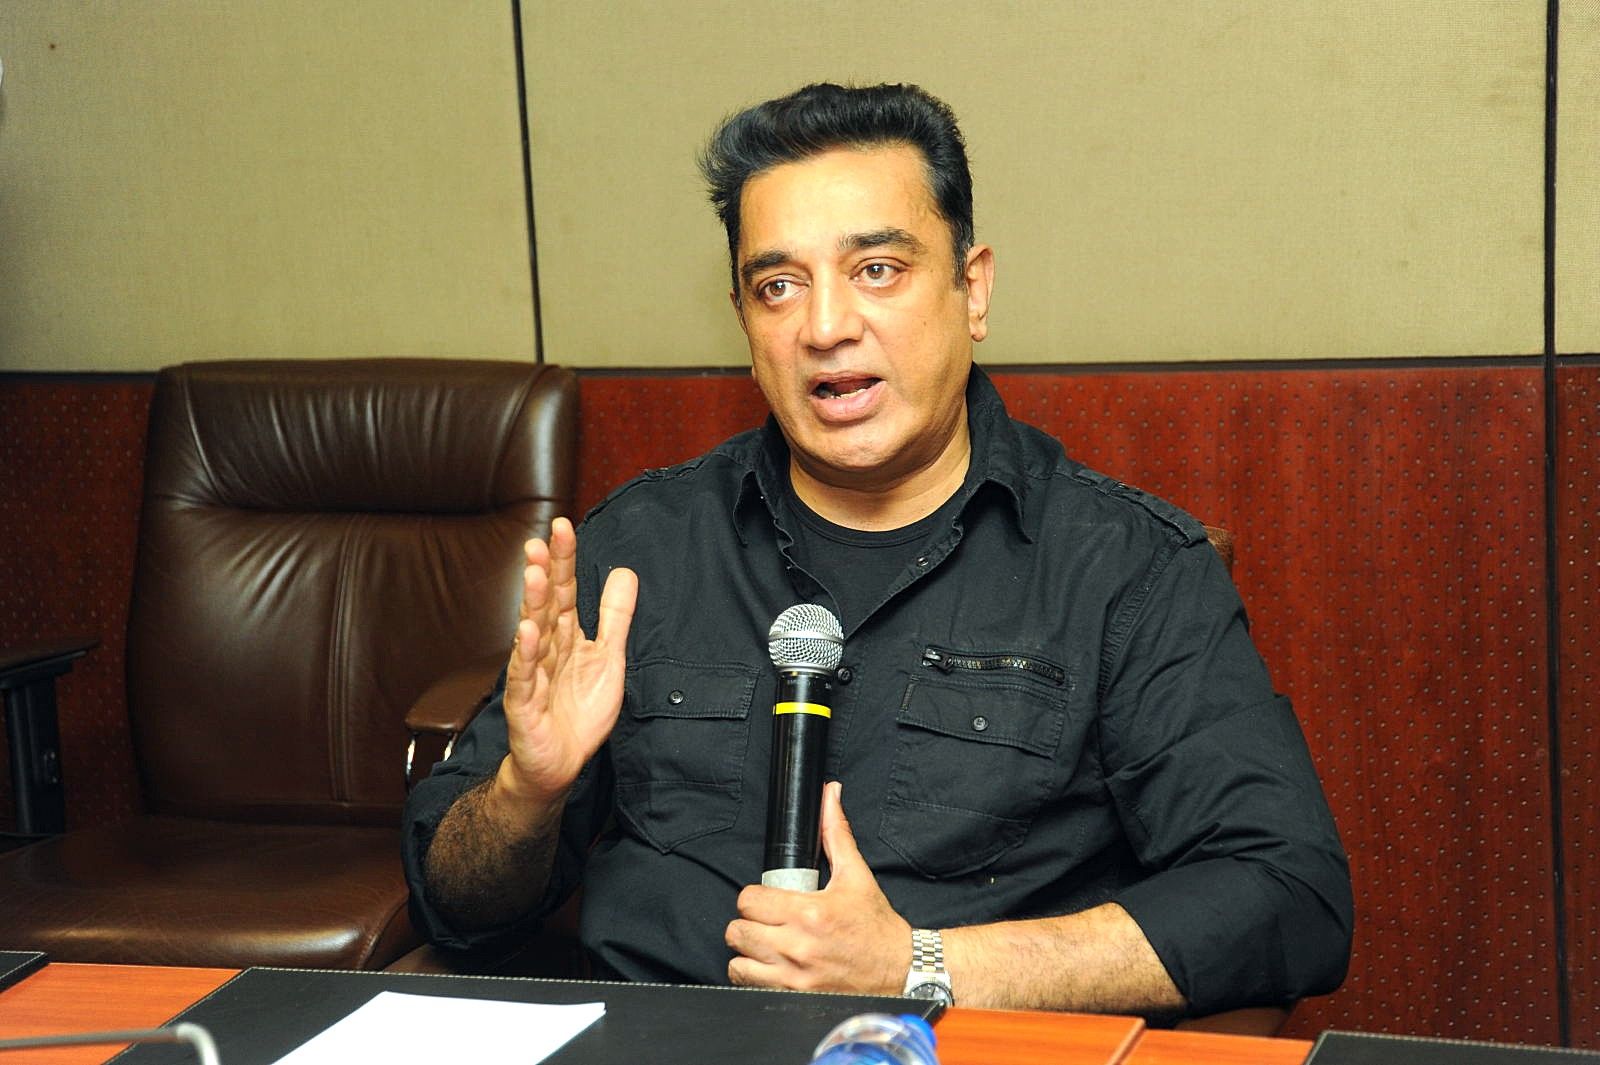 Kamal Haasan at Viswaroopam DTH Launch Pictures | Picture 353842